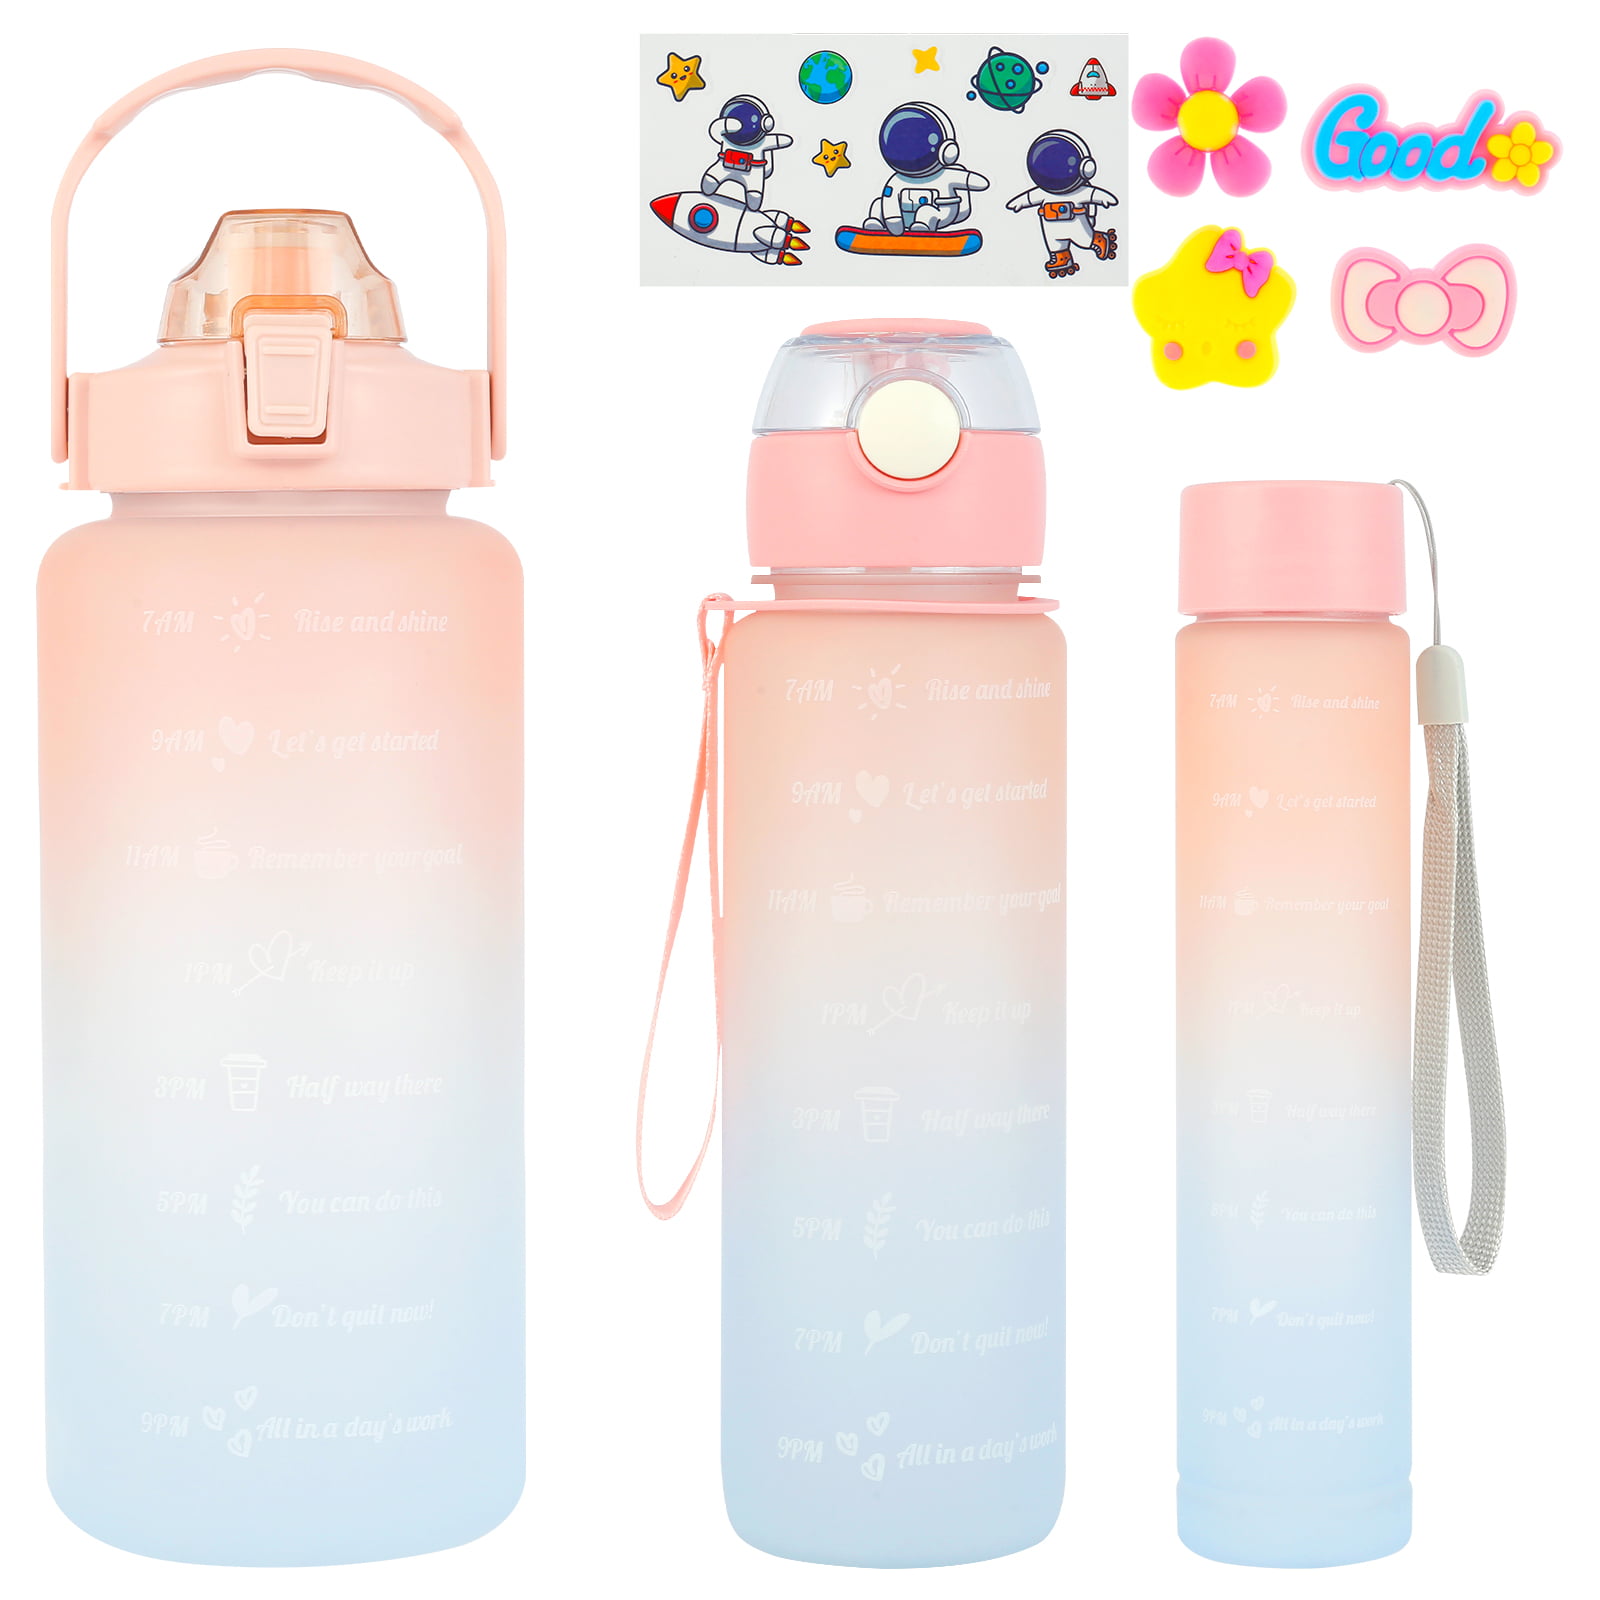 Maxer Game Anime 3D Lovely Eyes Teens Kids 28oz Metal Water Bottle for 6 Hours Hot & 24 Hours Cold Drinks, Sports Flask Great for Work, Gym, Travel